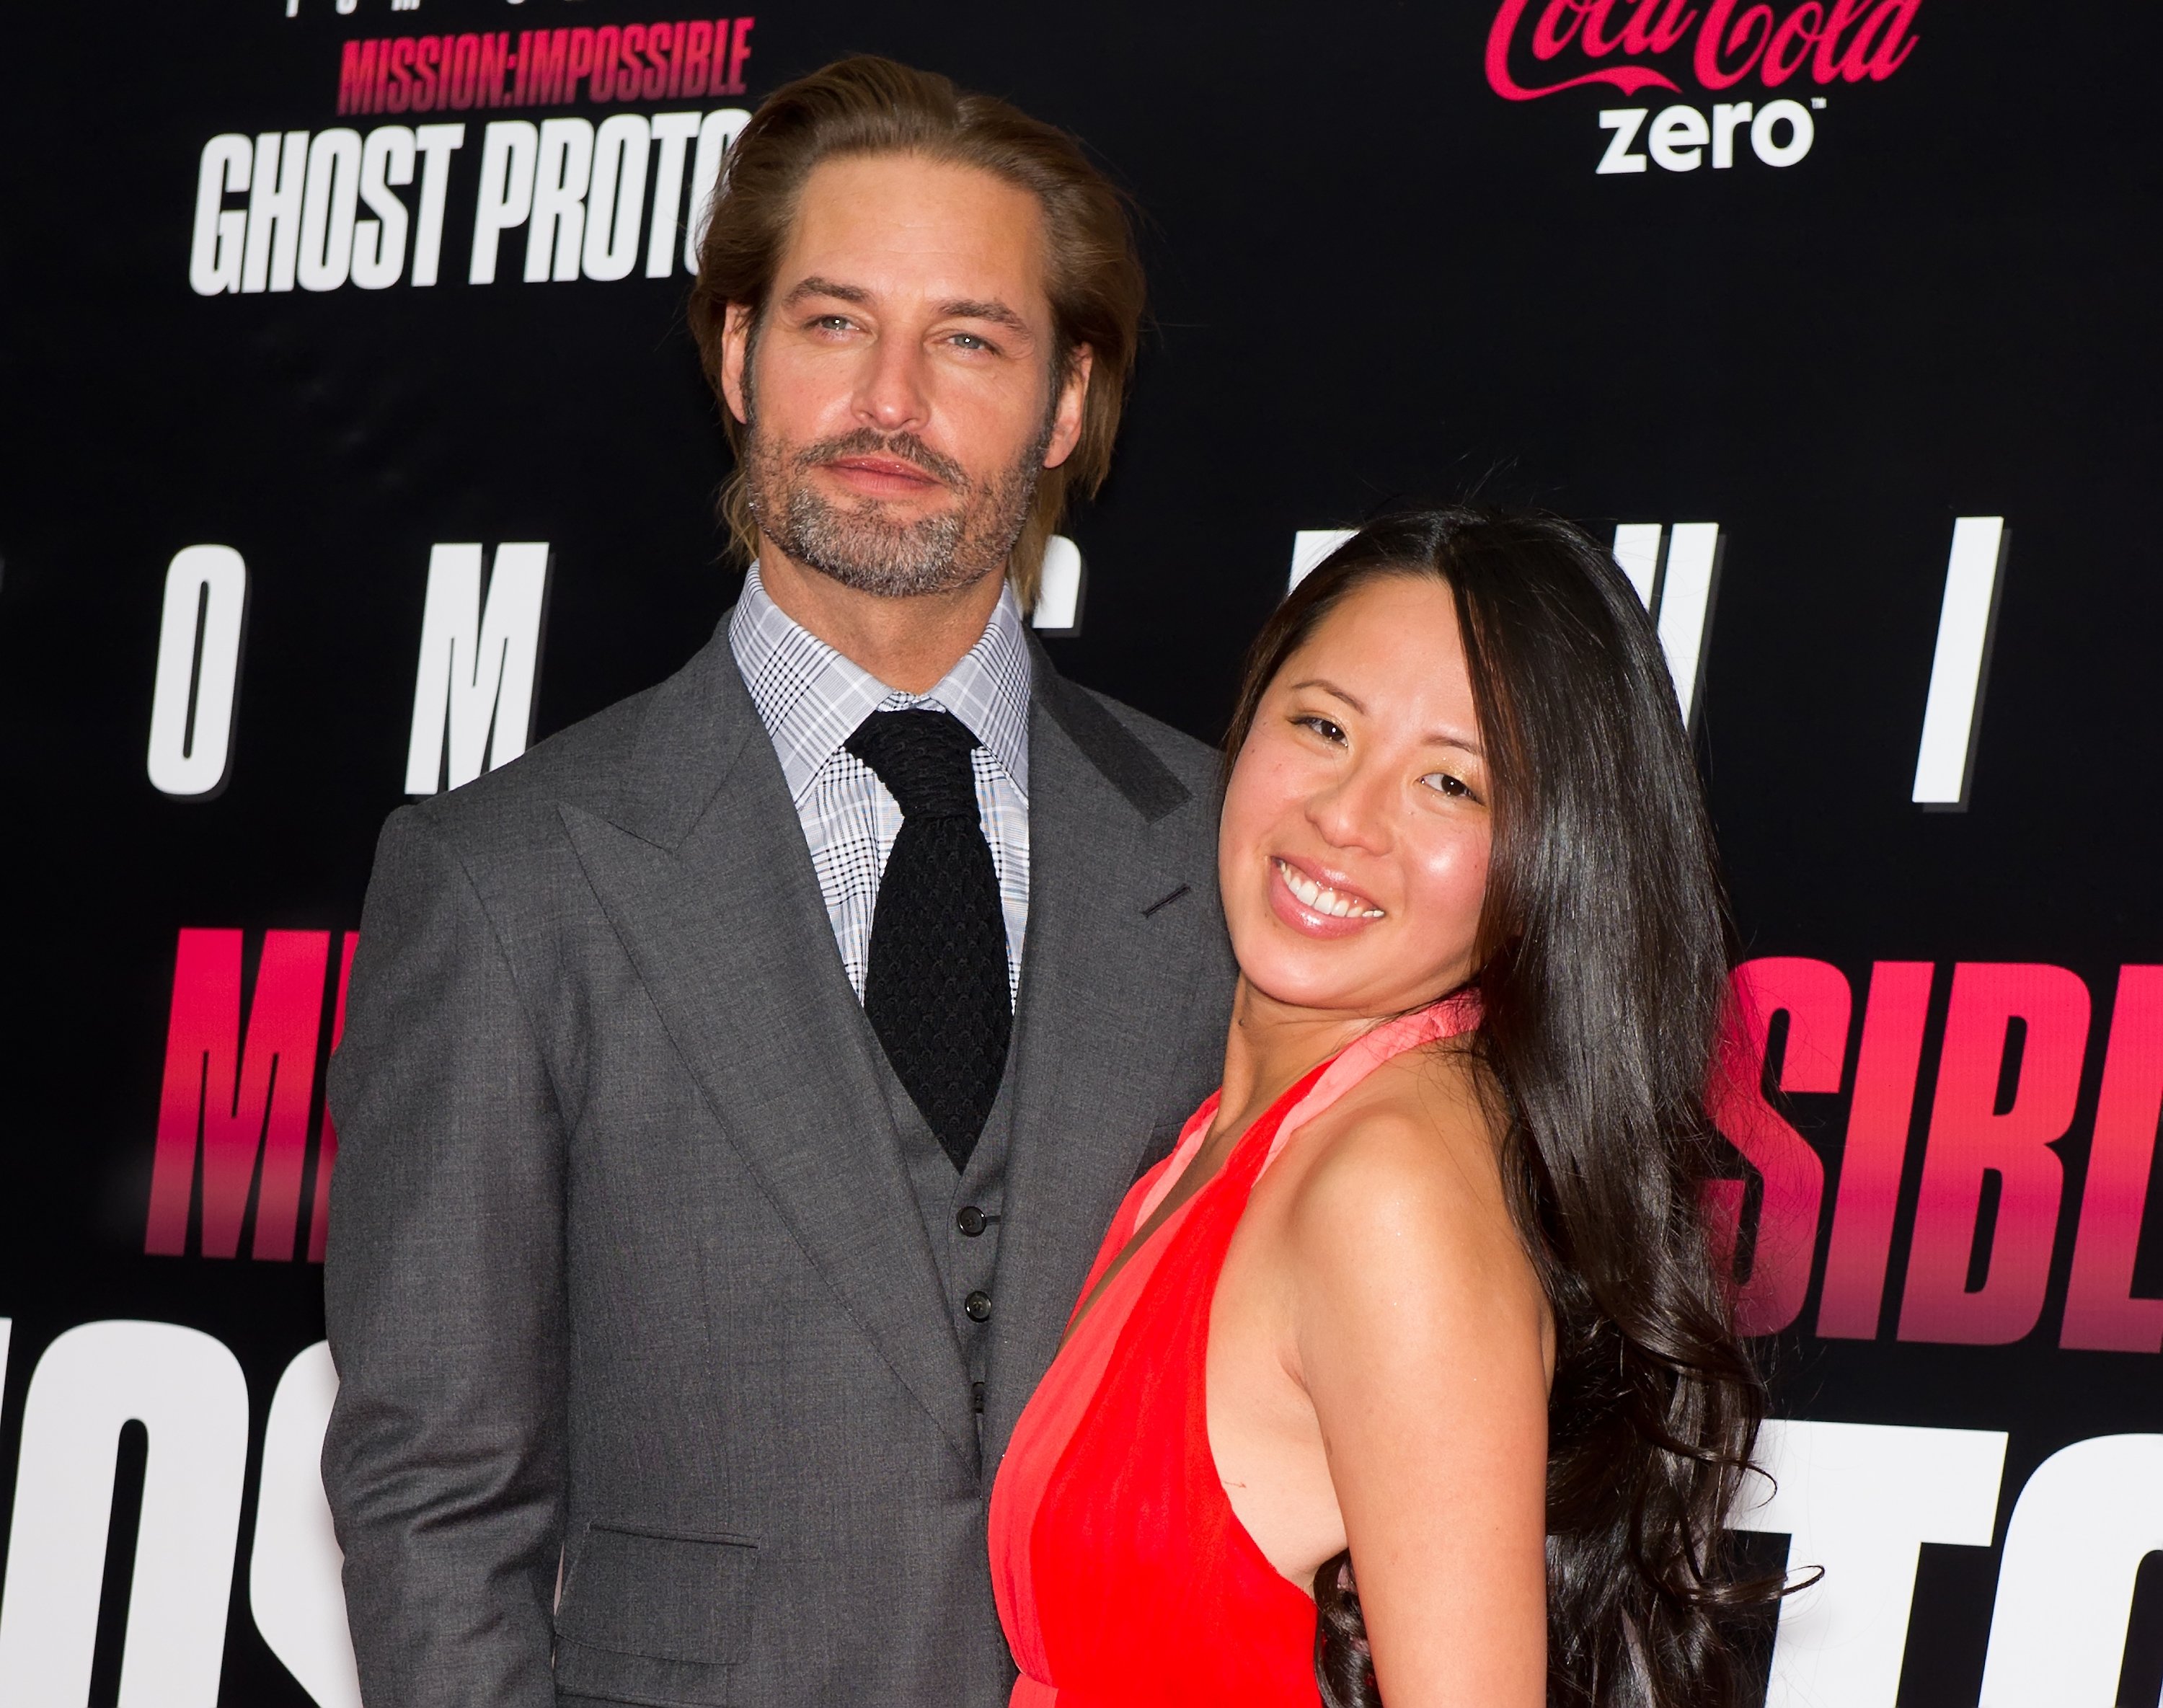 Hunter Lee Holloway Is Josh Holloway's Son and His Second Child